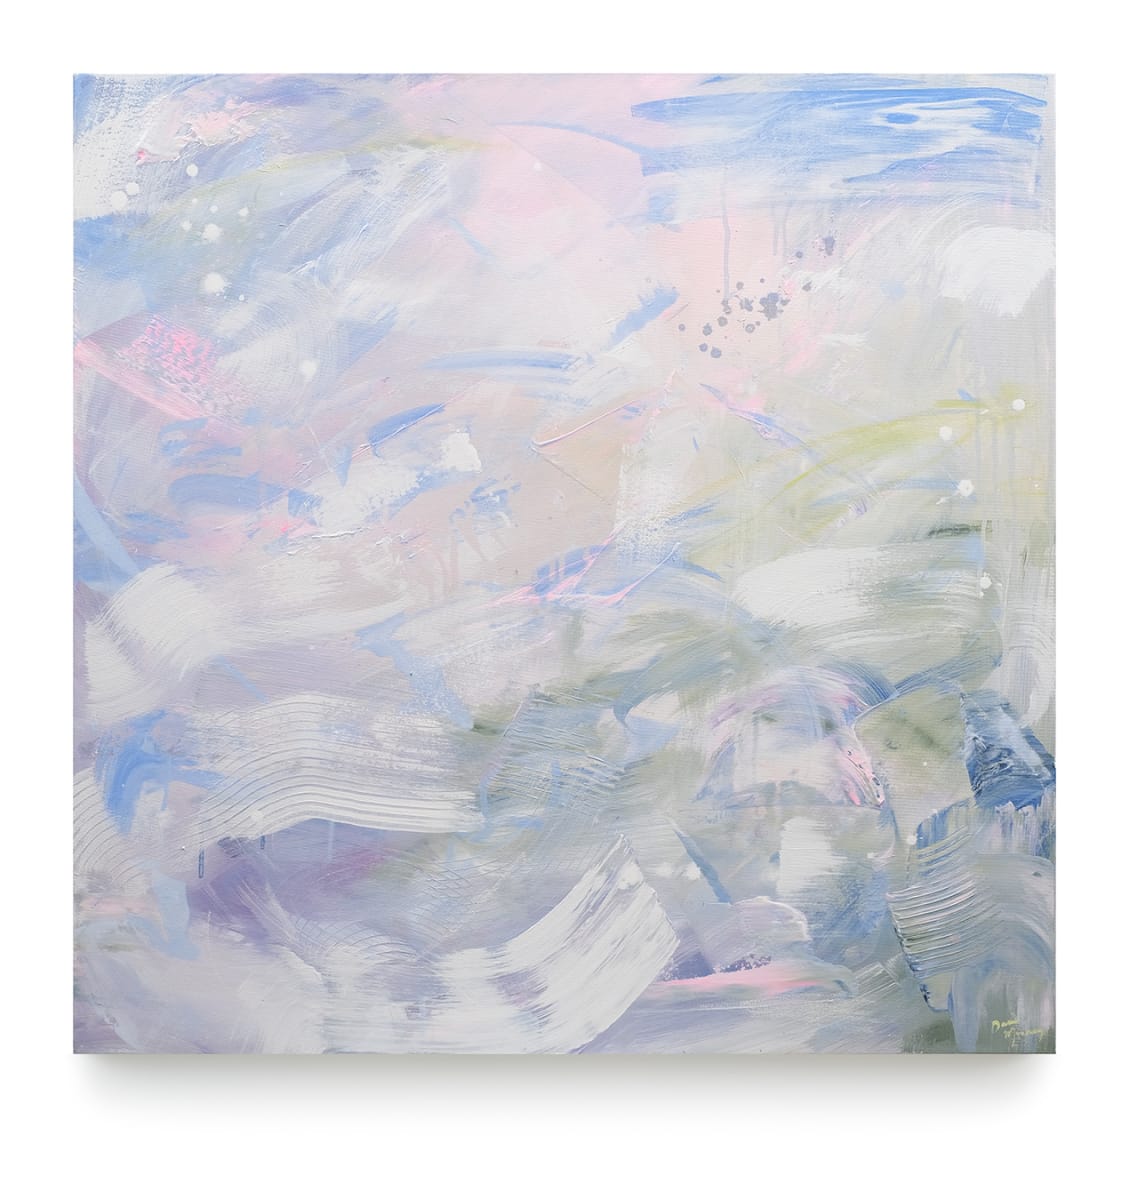 Traces of Memory by Dana Mooney  Image: "Traces of Memory" is the ideal dreamstate, a calming artwork perfect for your bedroom or anywhere that art directly impacts mental health.  This painting on canvas pairs beautifully with "Featherlight." 

Acrylic on Canvas

30" x 30" 

$1575